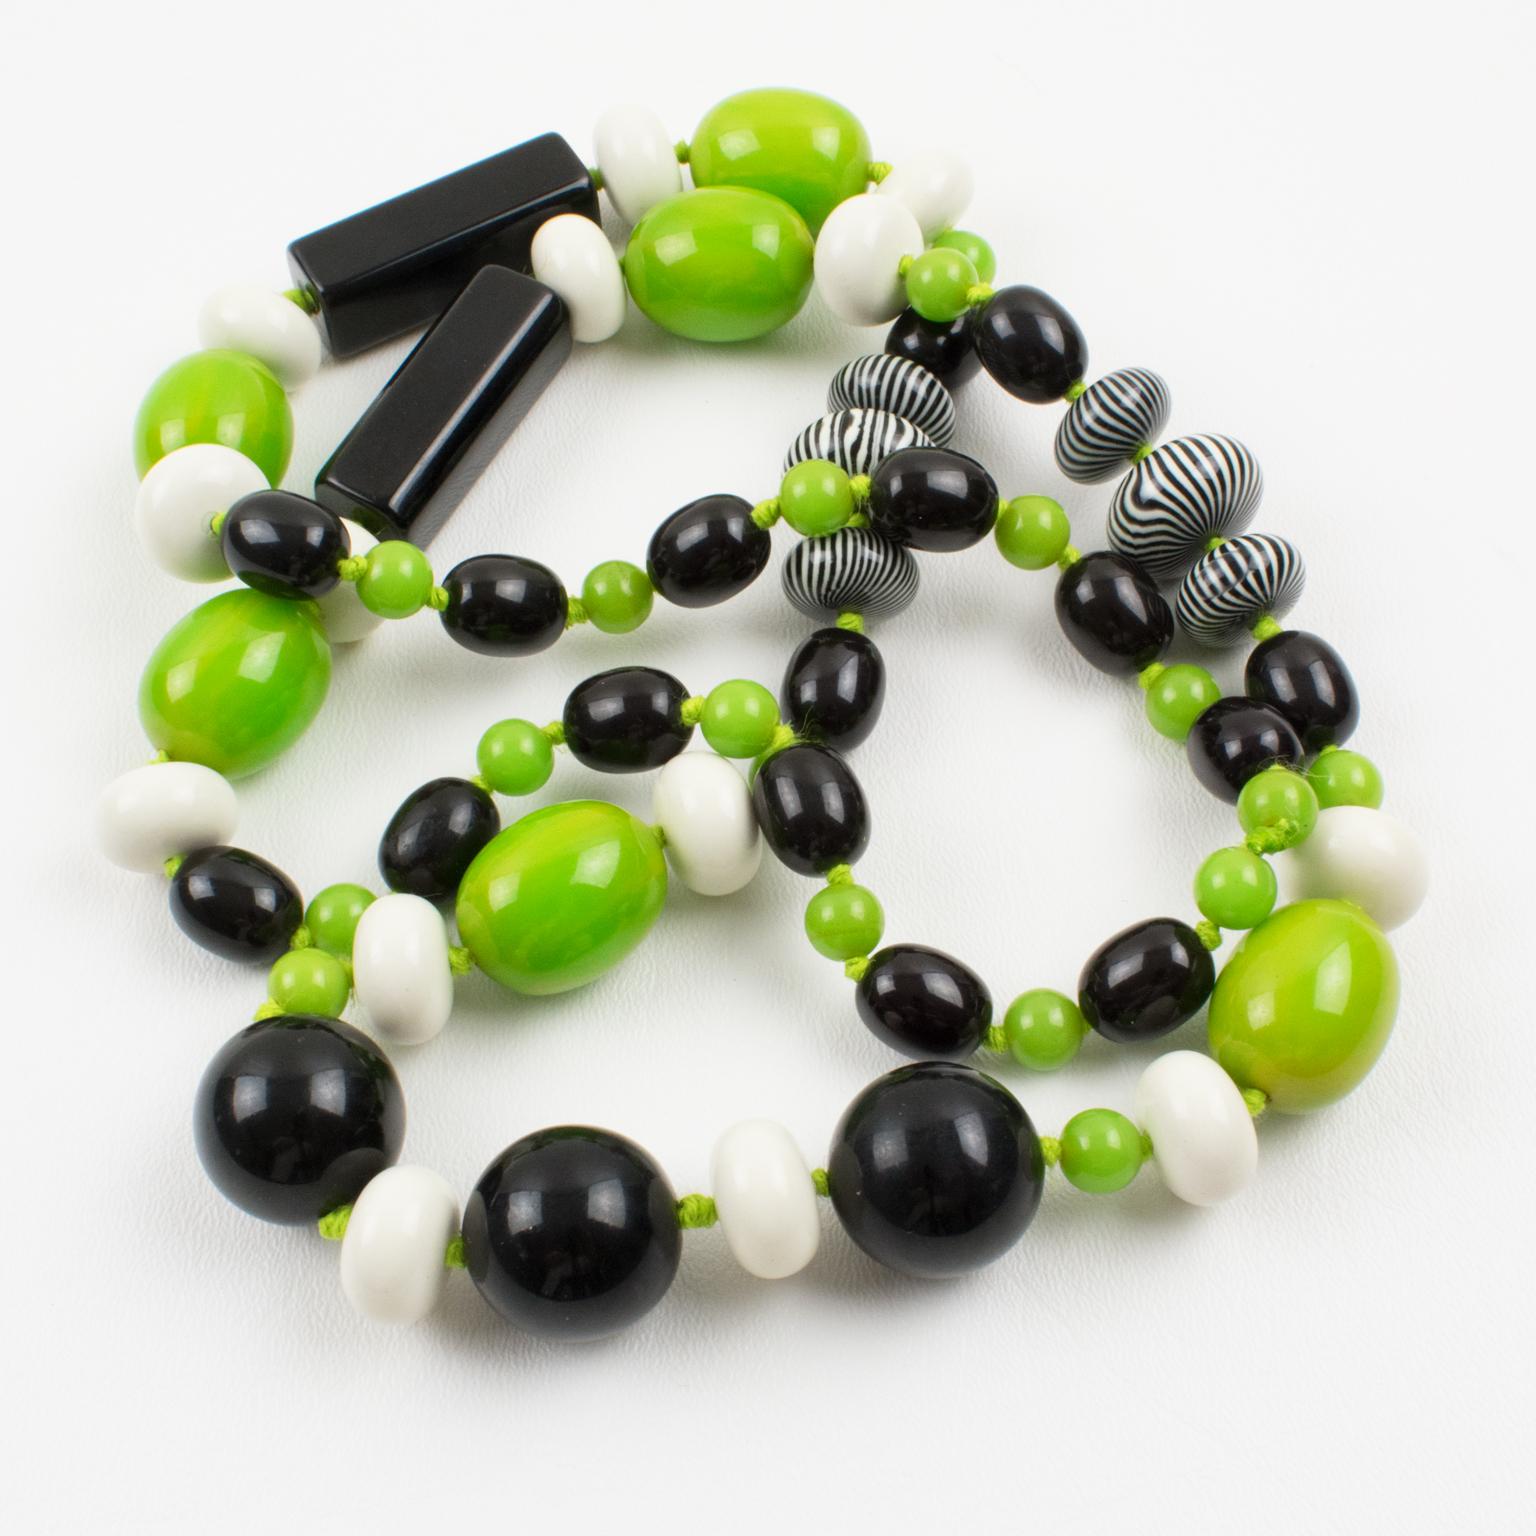 Art Deco Bakelite and Lucite Necklace Extra Long Shape Black, White and Apple Green Beads